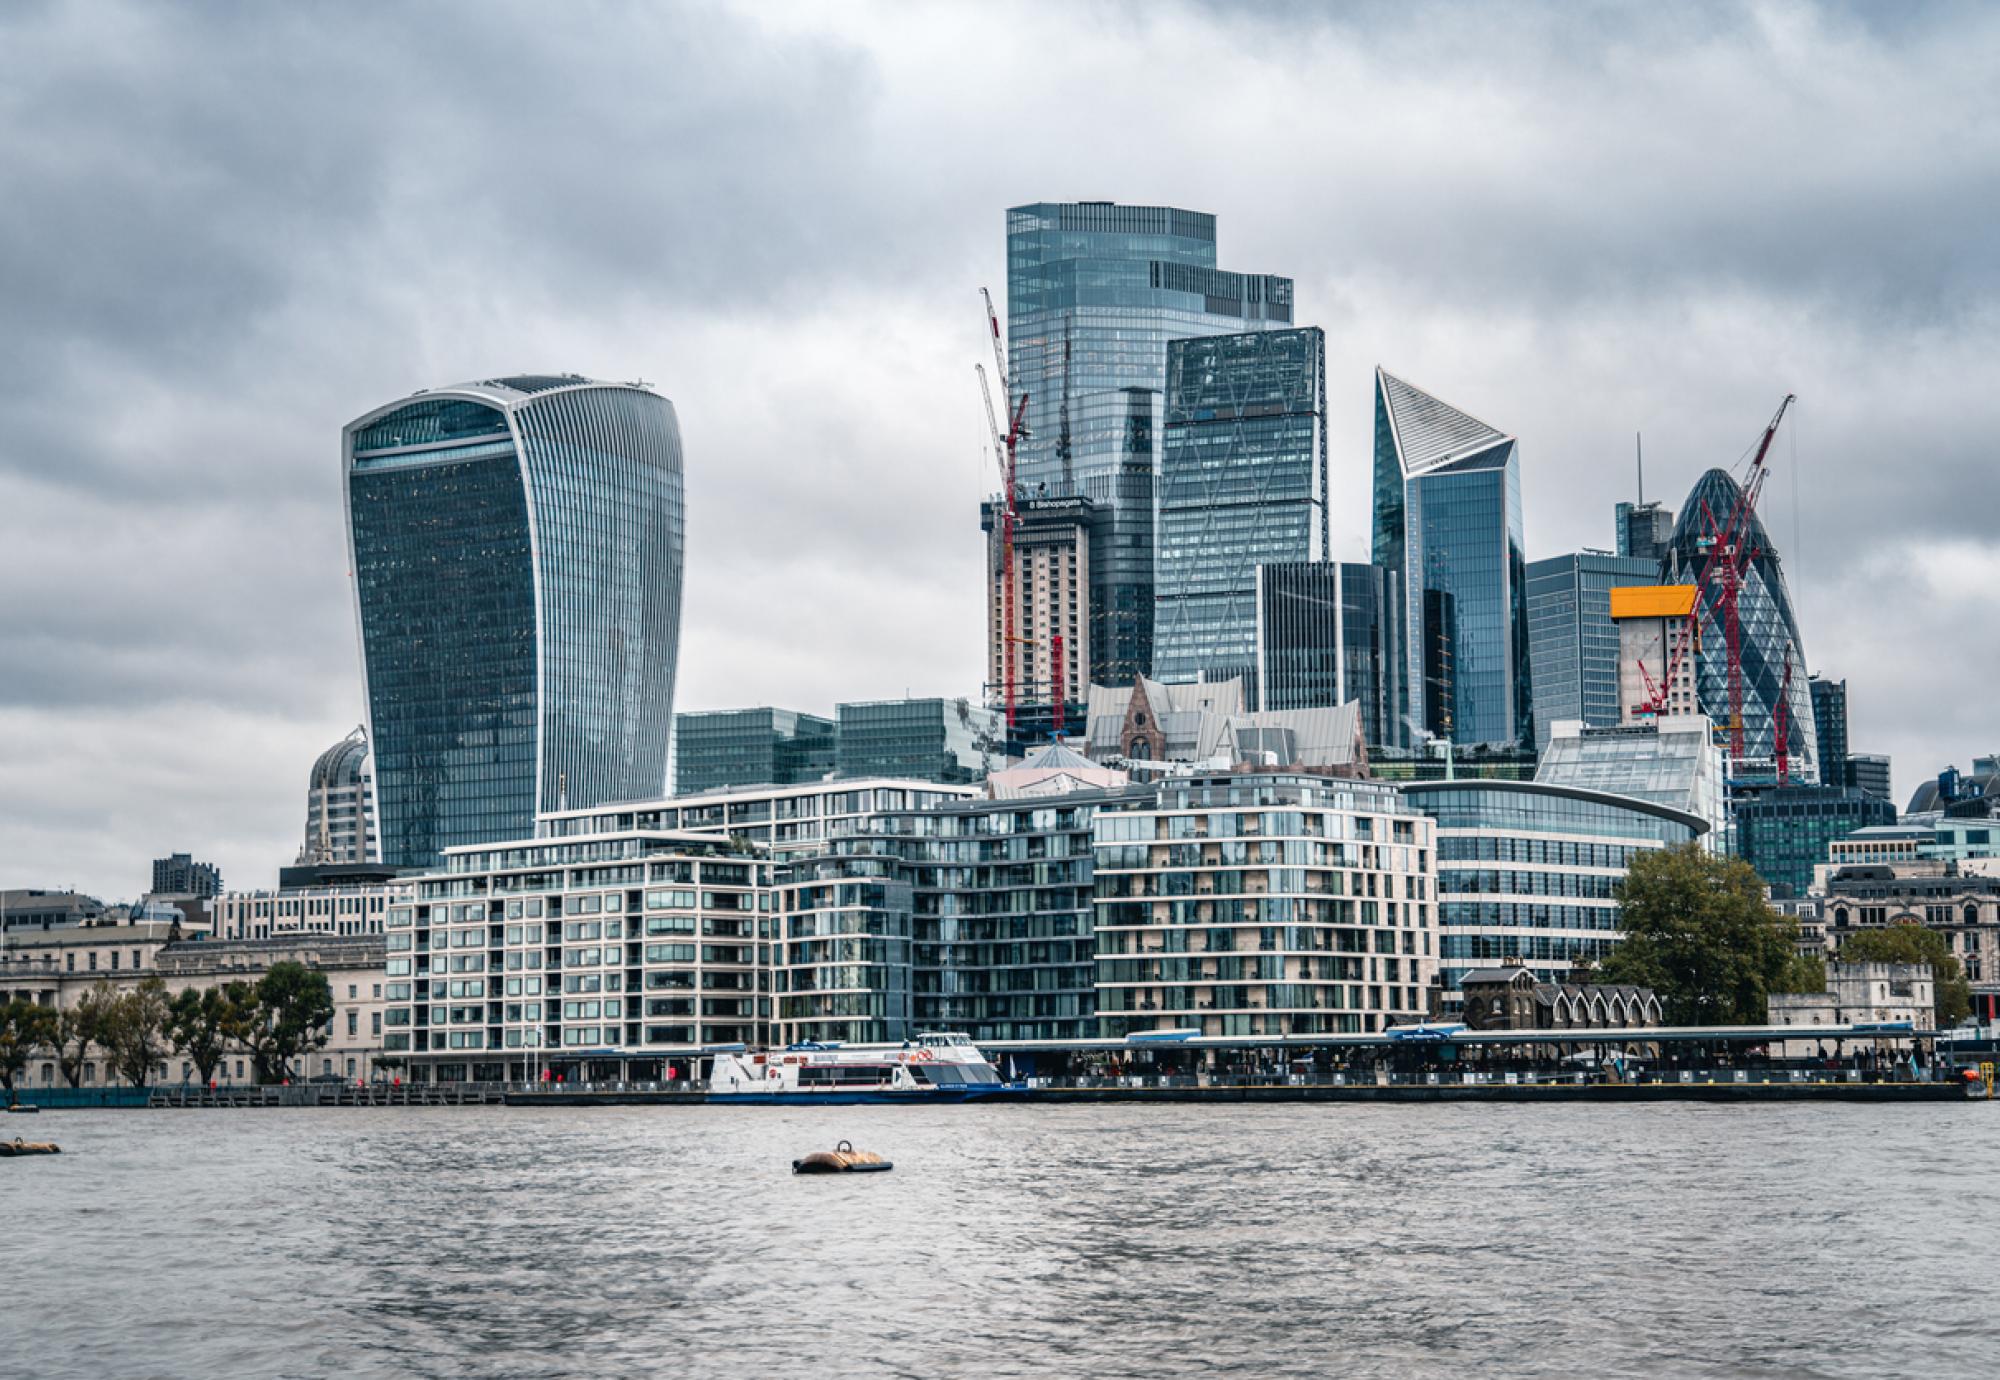 Image of the City of London from the River Thames